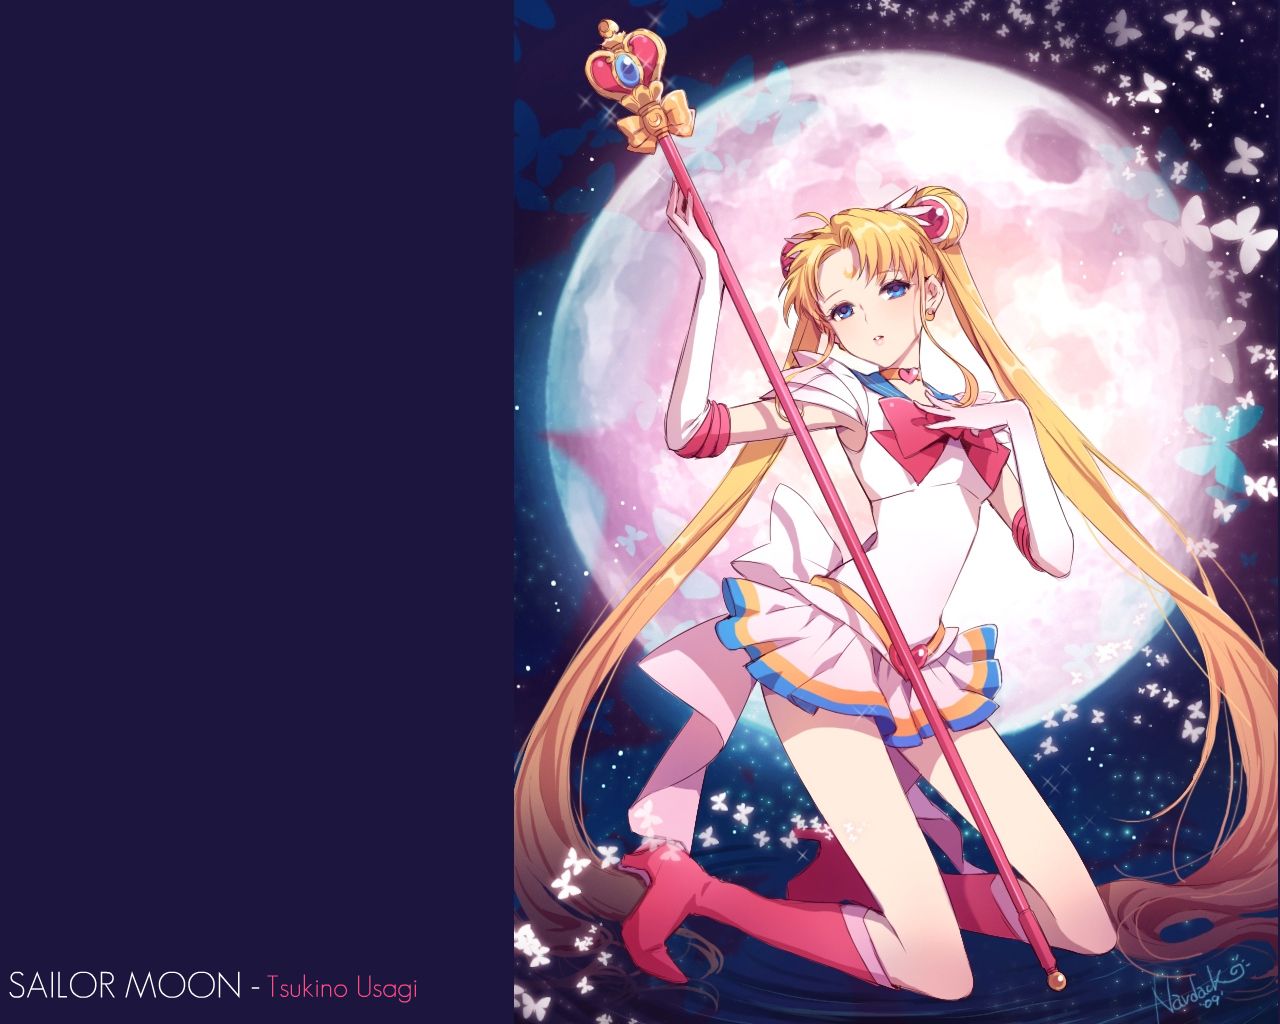 Free download Sailor Moon Characters Wallpaper 1280x1024 Full HD Wallpaper [1280x1024] for your Desktop, Mobile & Tablet. Explore Sailor Moon Wallpaper. Sailor Moon Manga Wallpaper, Sailor Moon Wallpaper 1920x